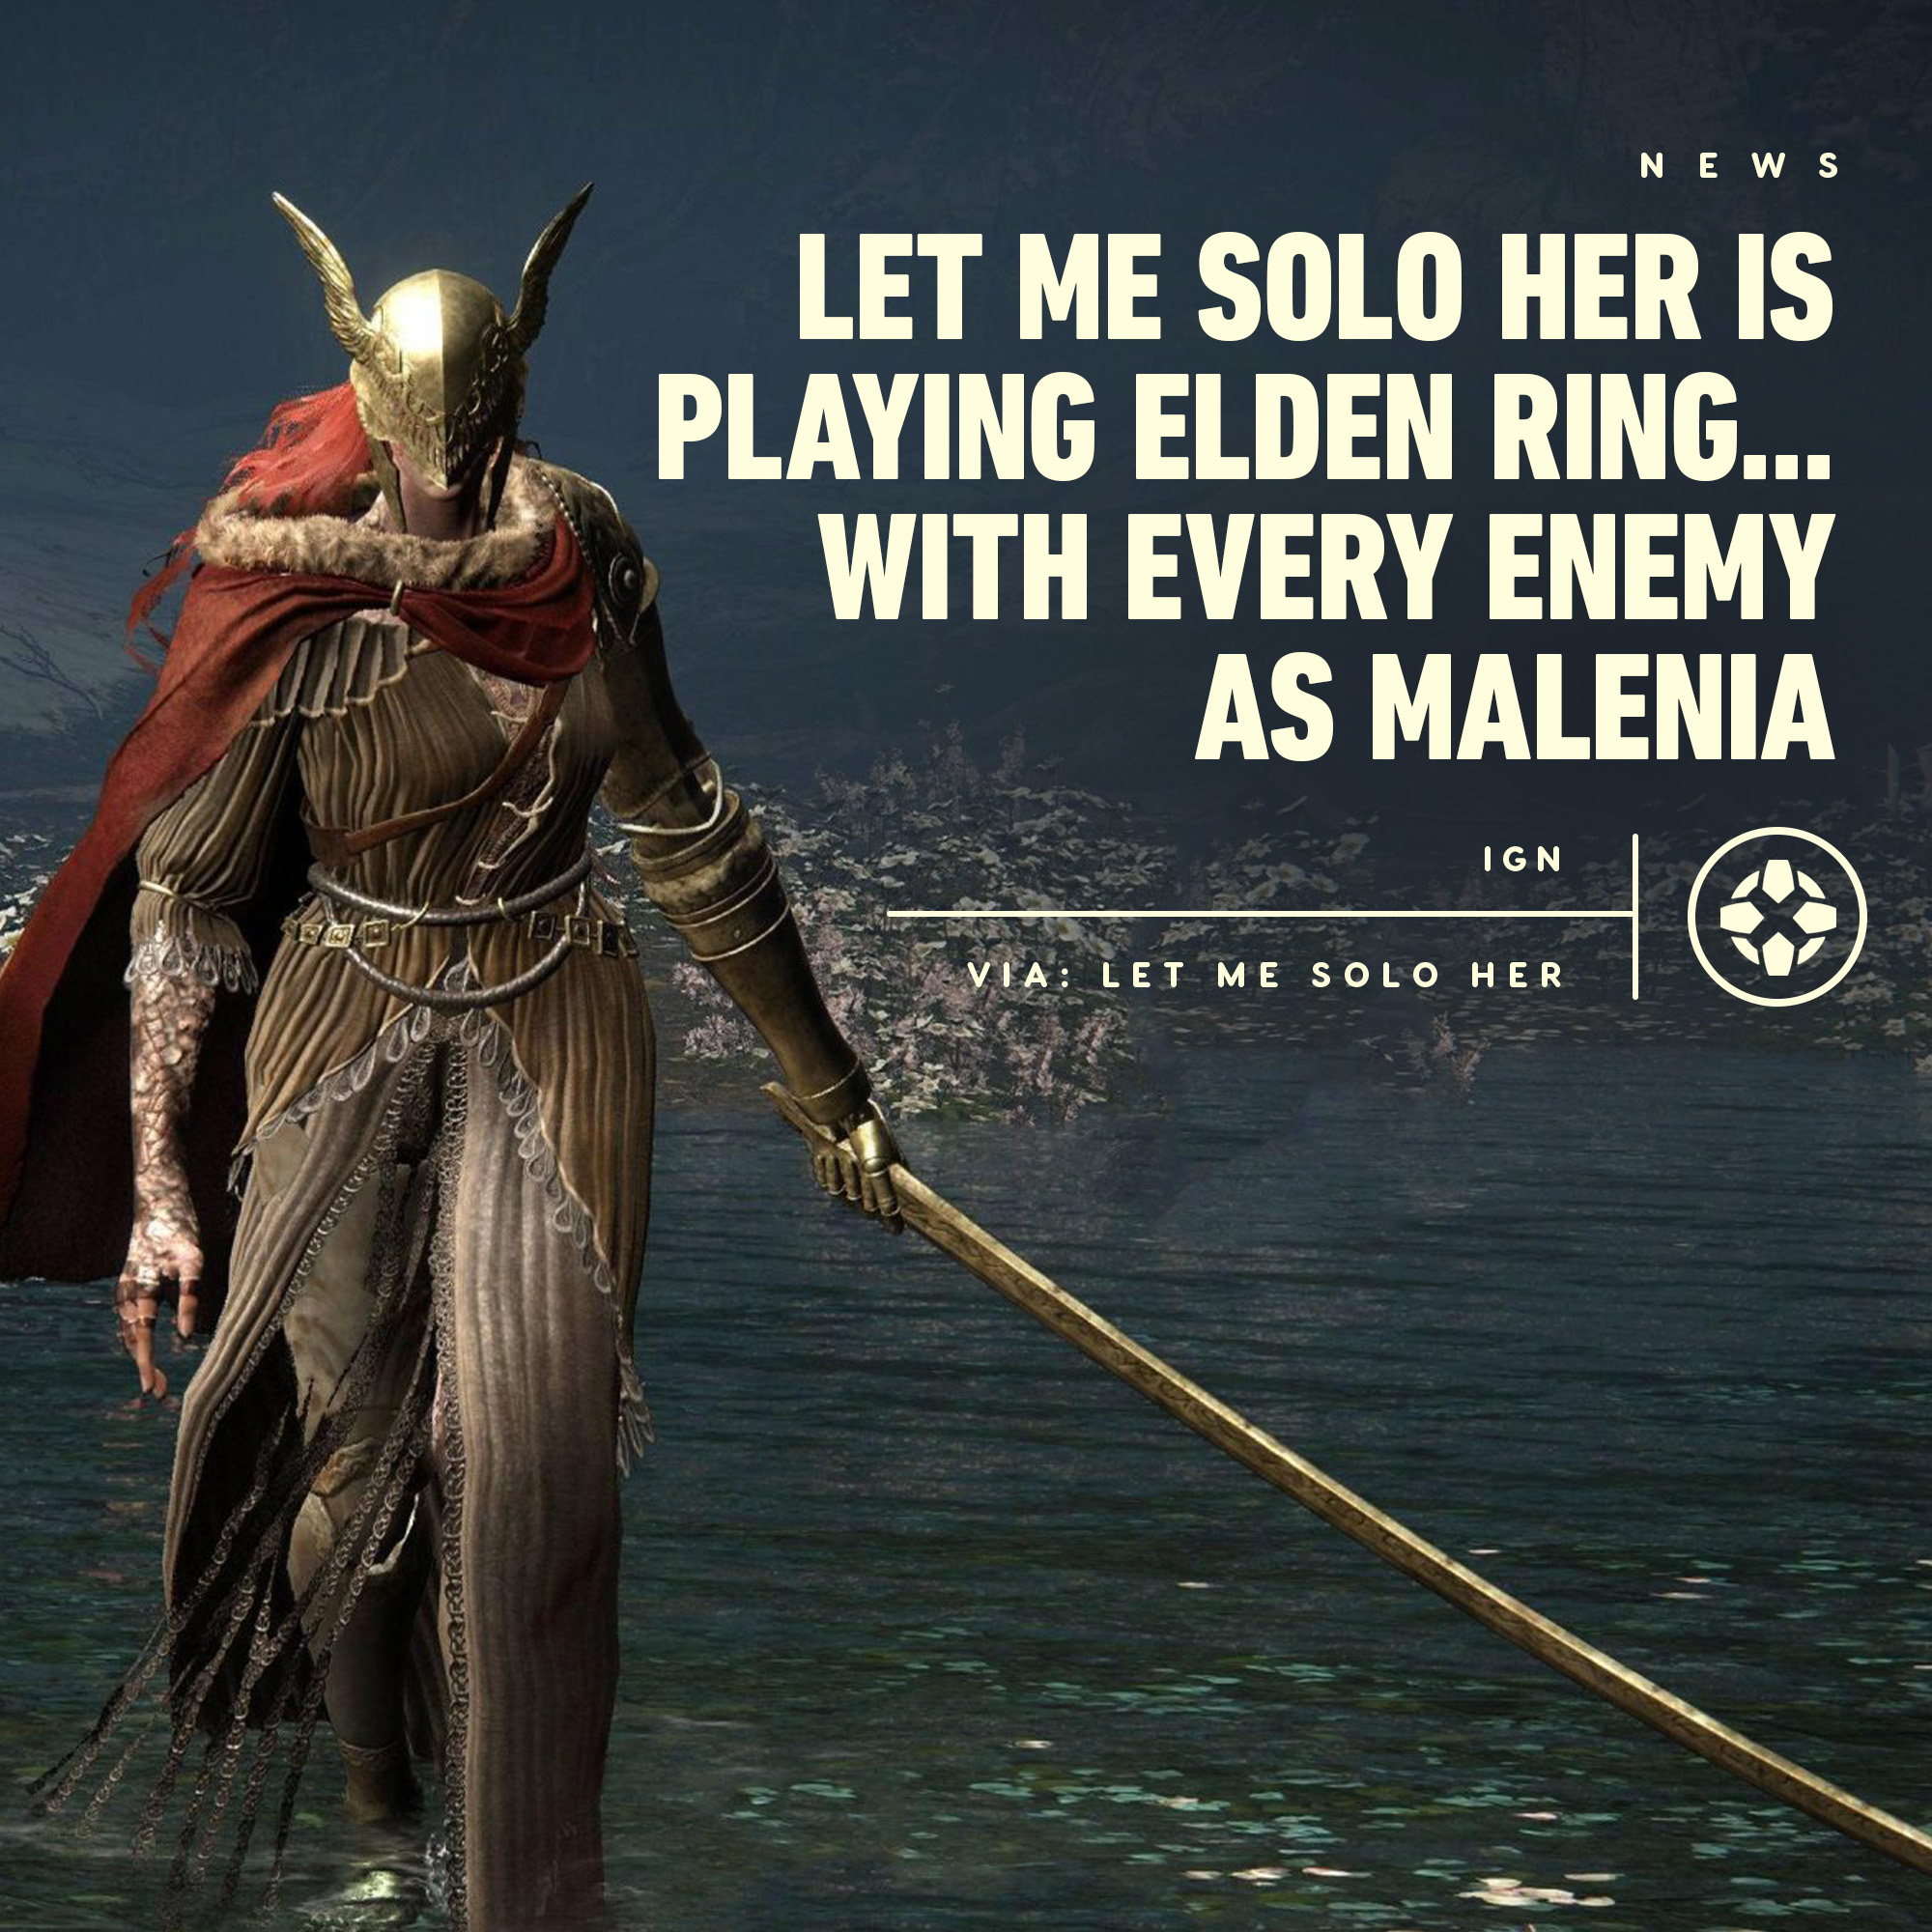 IGN on X: Let Me Solo Her, the legendary Elden Ring player known